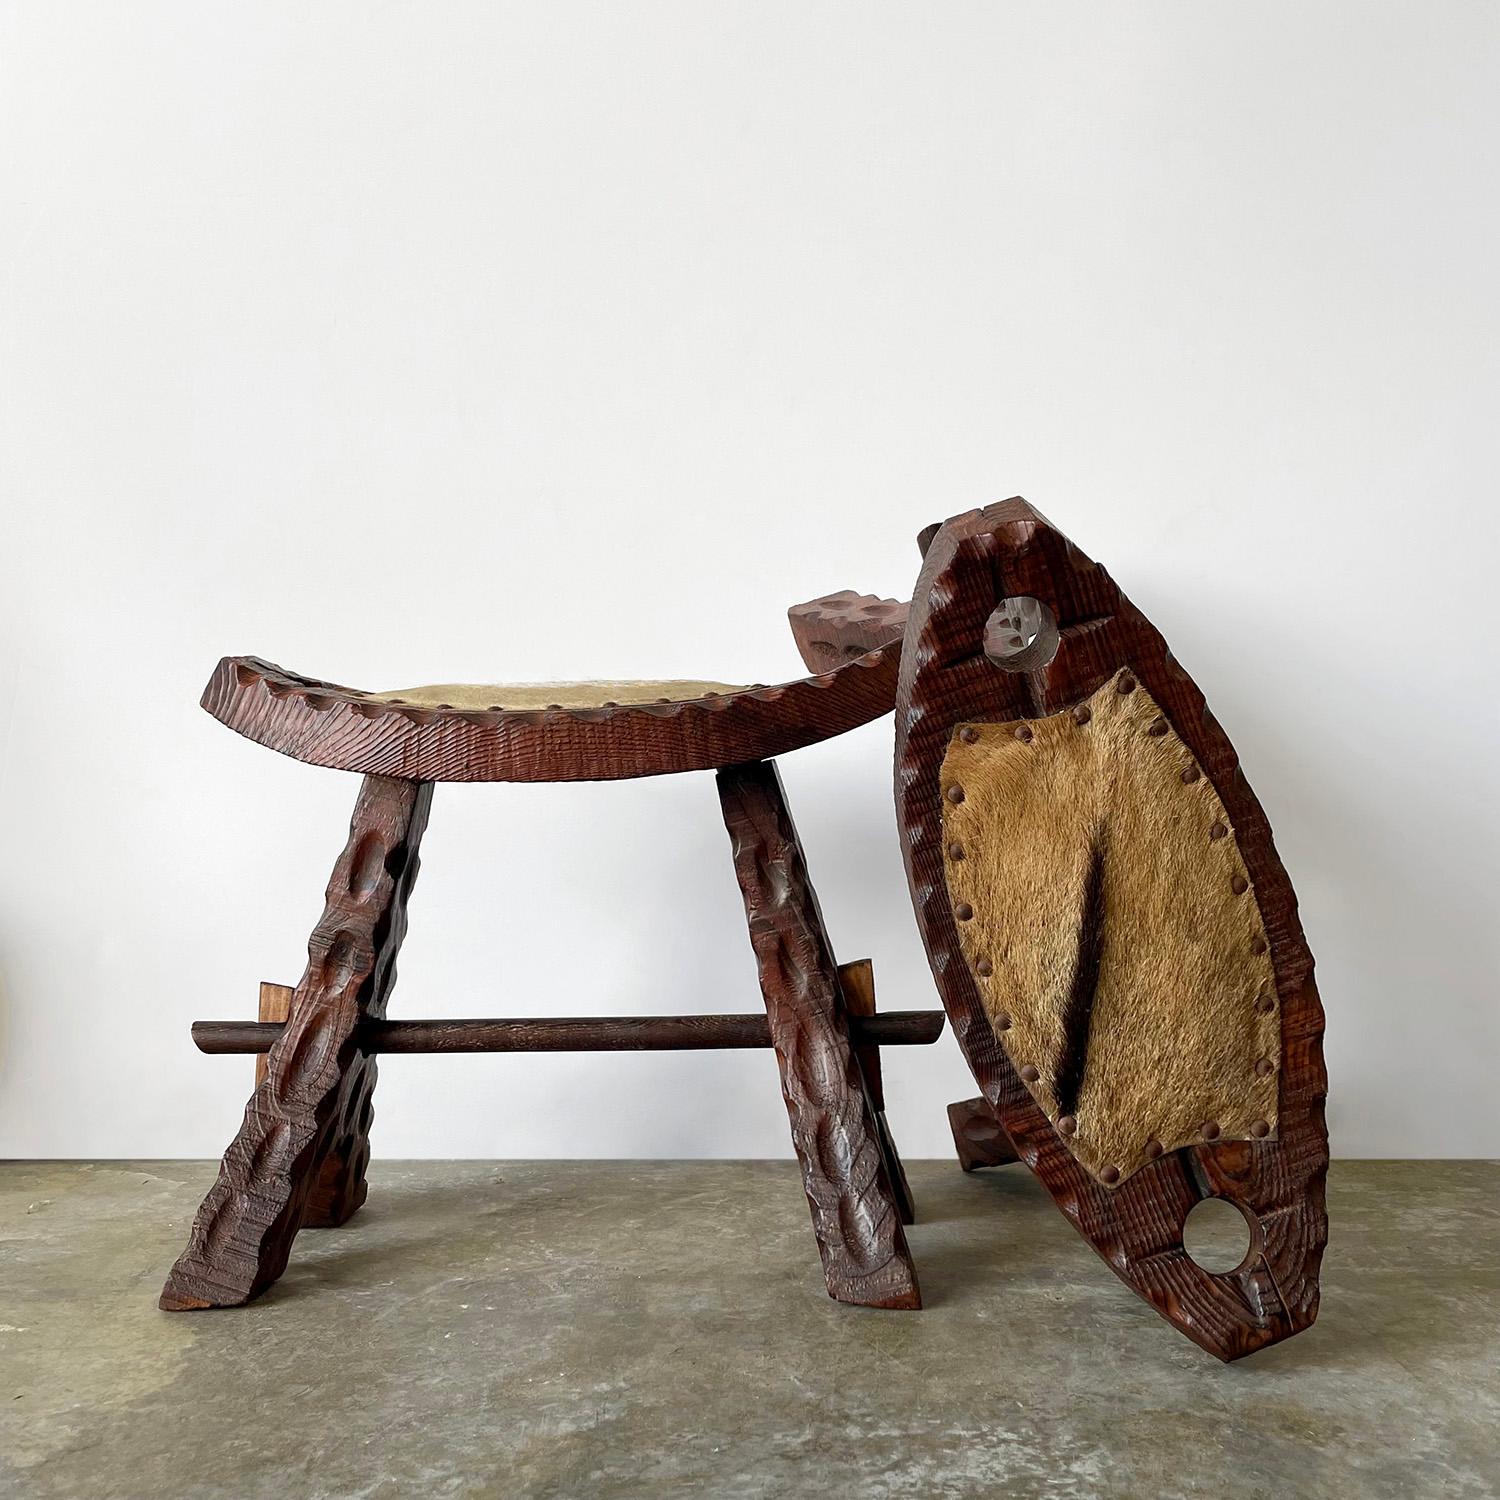 Pair of French rustic wood chalet stools
France, early 20th century
We believe these stools were handcrafted by someone with a deep appreciation and love for wood
These heavy weight, solid stools are all about the details
Wonderful textured grain